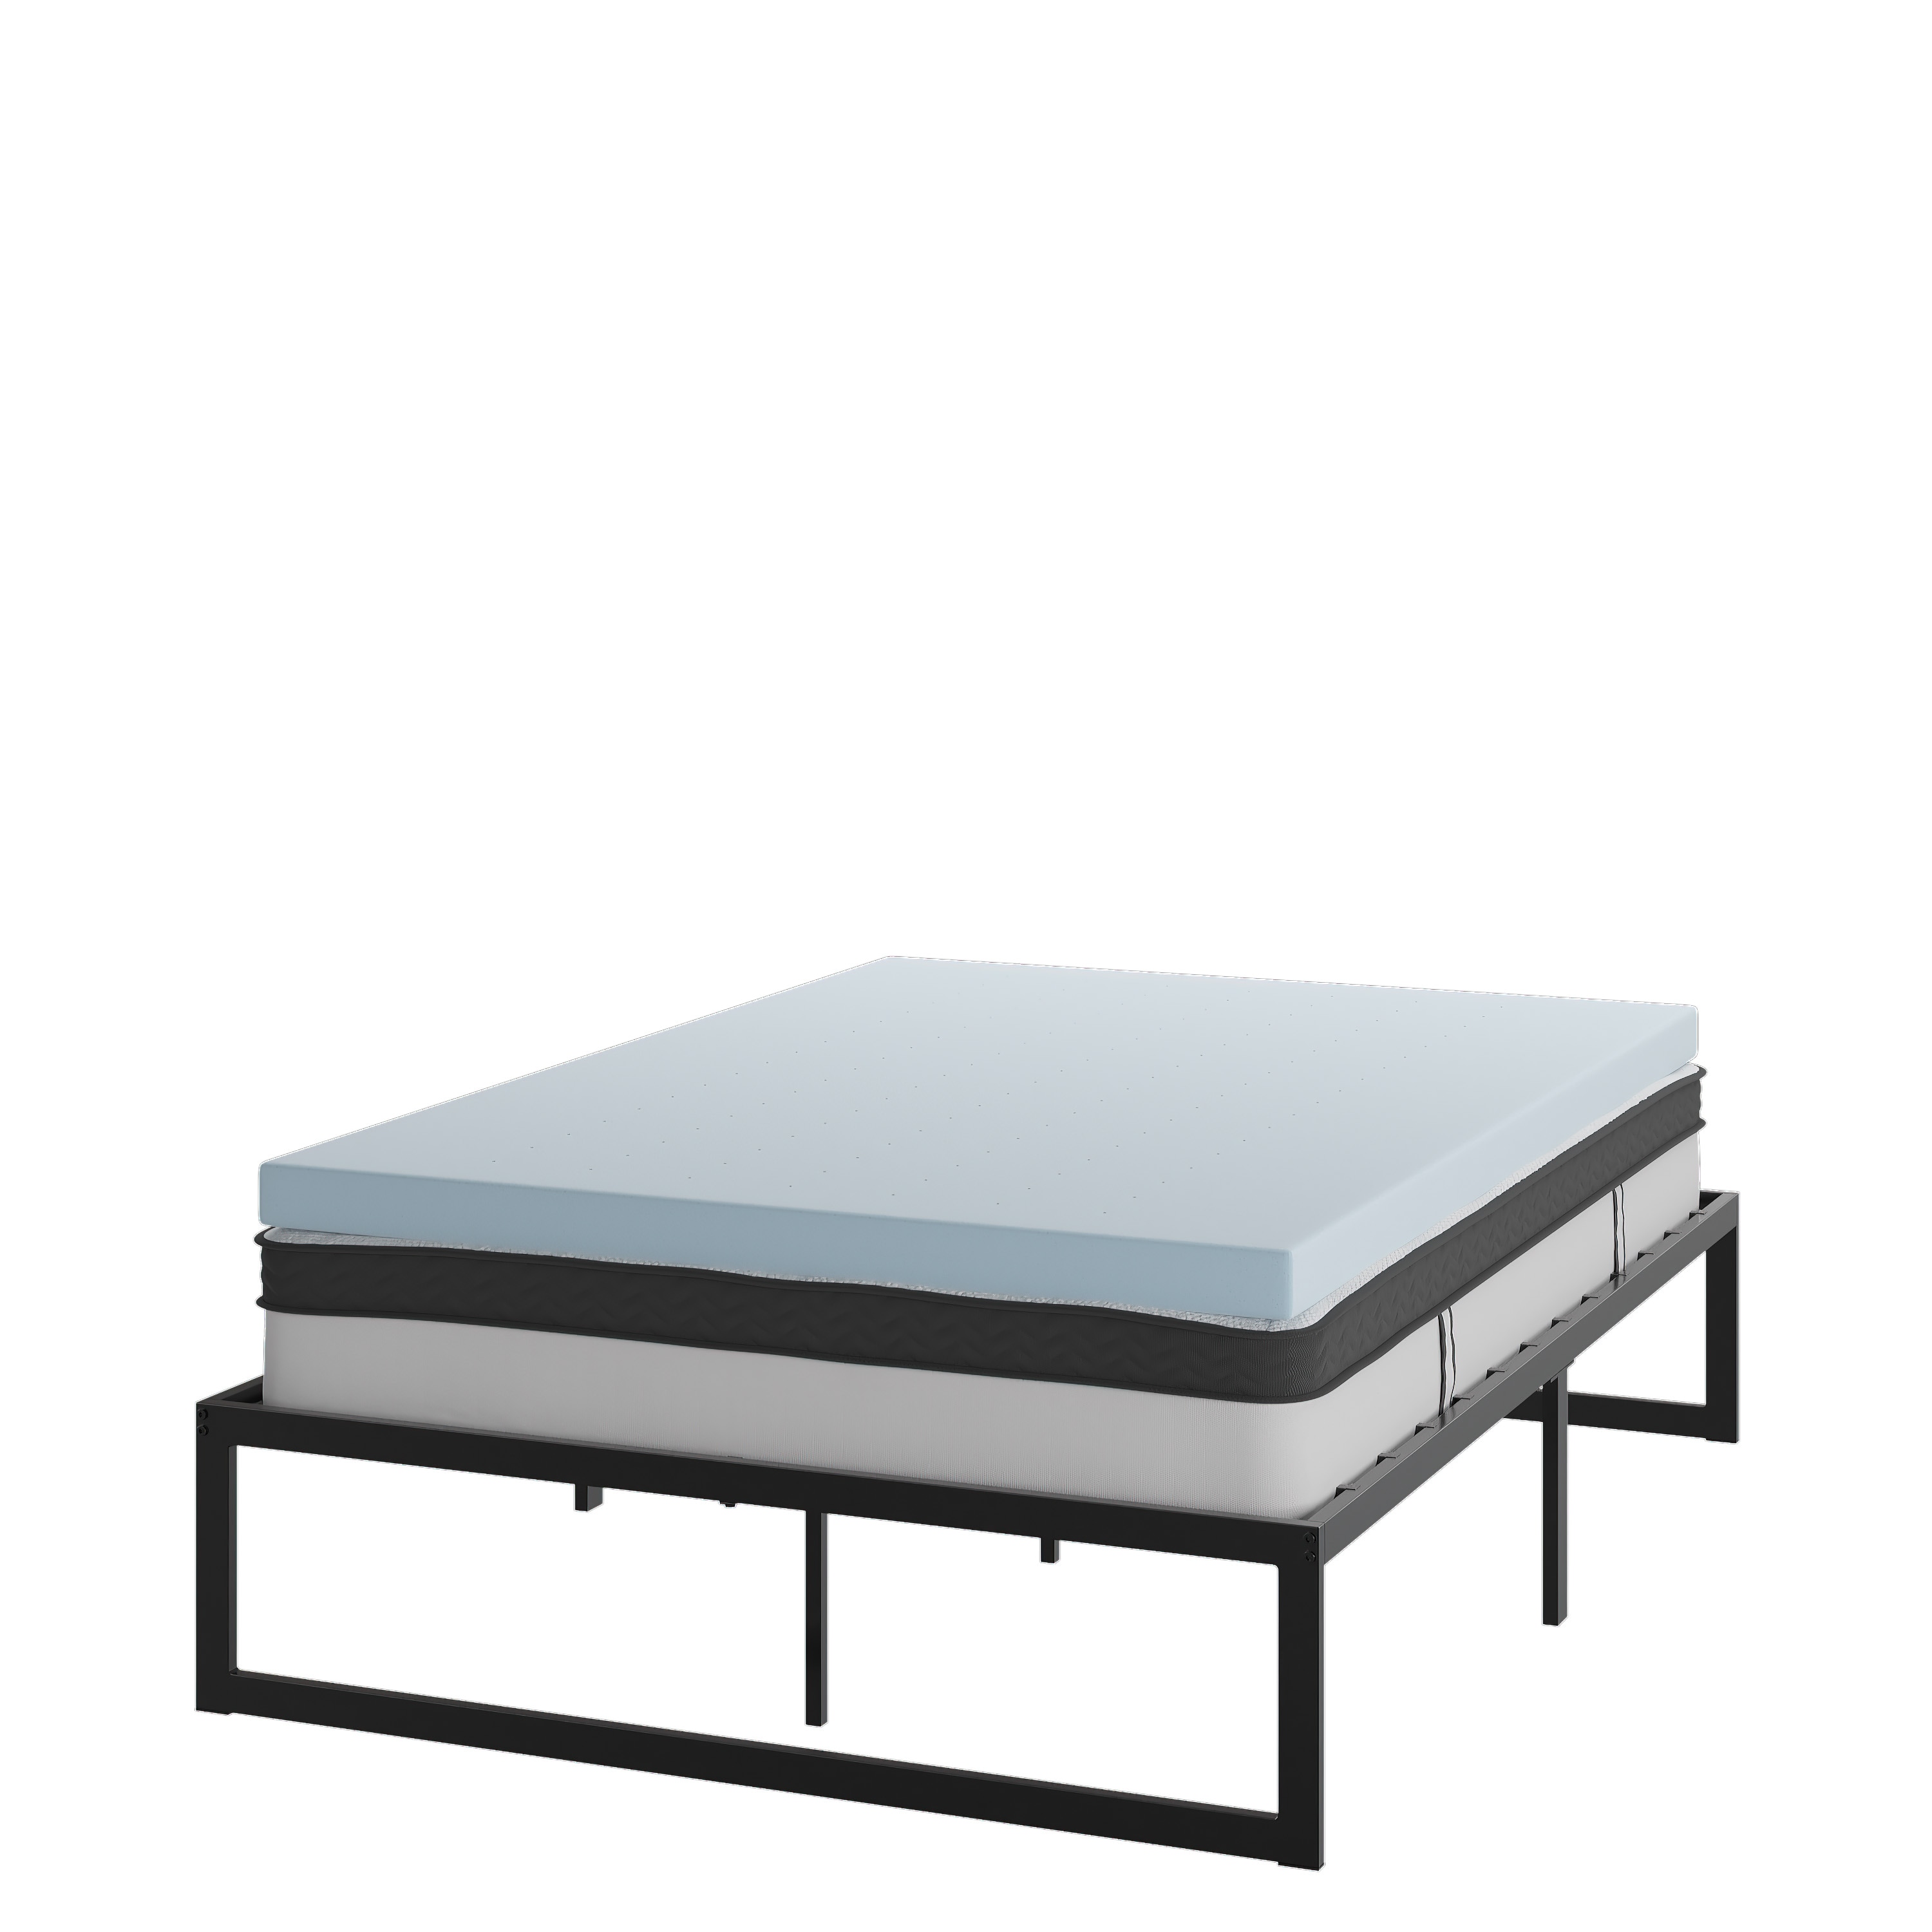 Flash Furniture 14 Inch Metal Platform Bed Frame with 10 Inch Pocket Spring Mattress and 3 inch Cool Gel Memory Foam Topper - Full Full Contemporary -  XU-BD10-10PSM3M35-F-GG